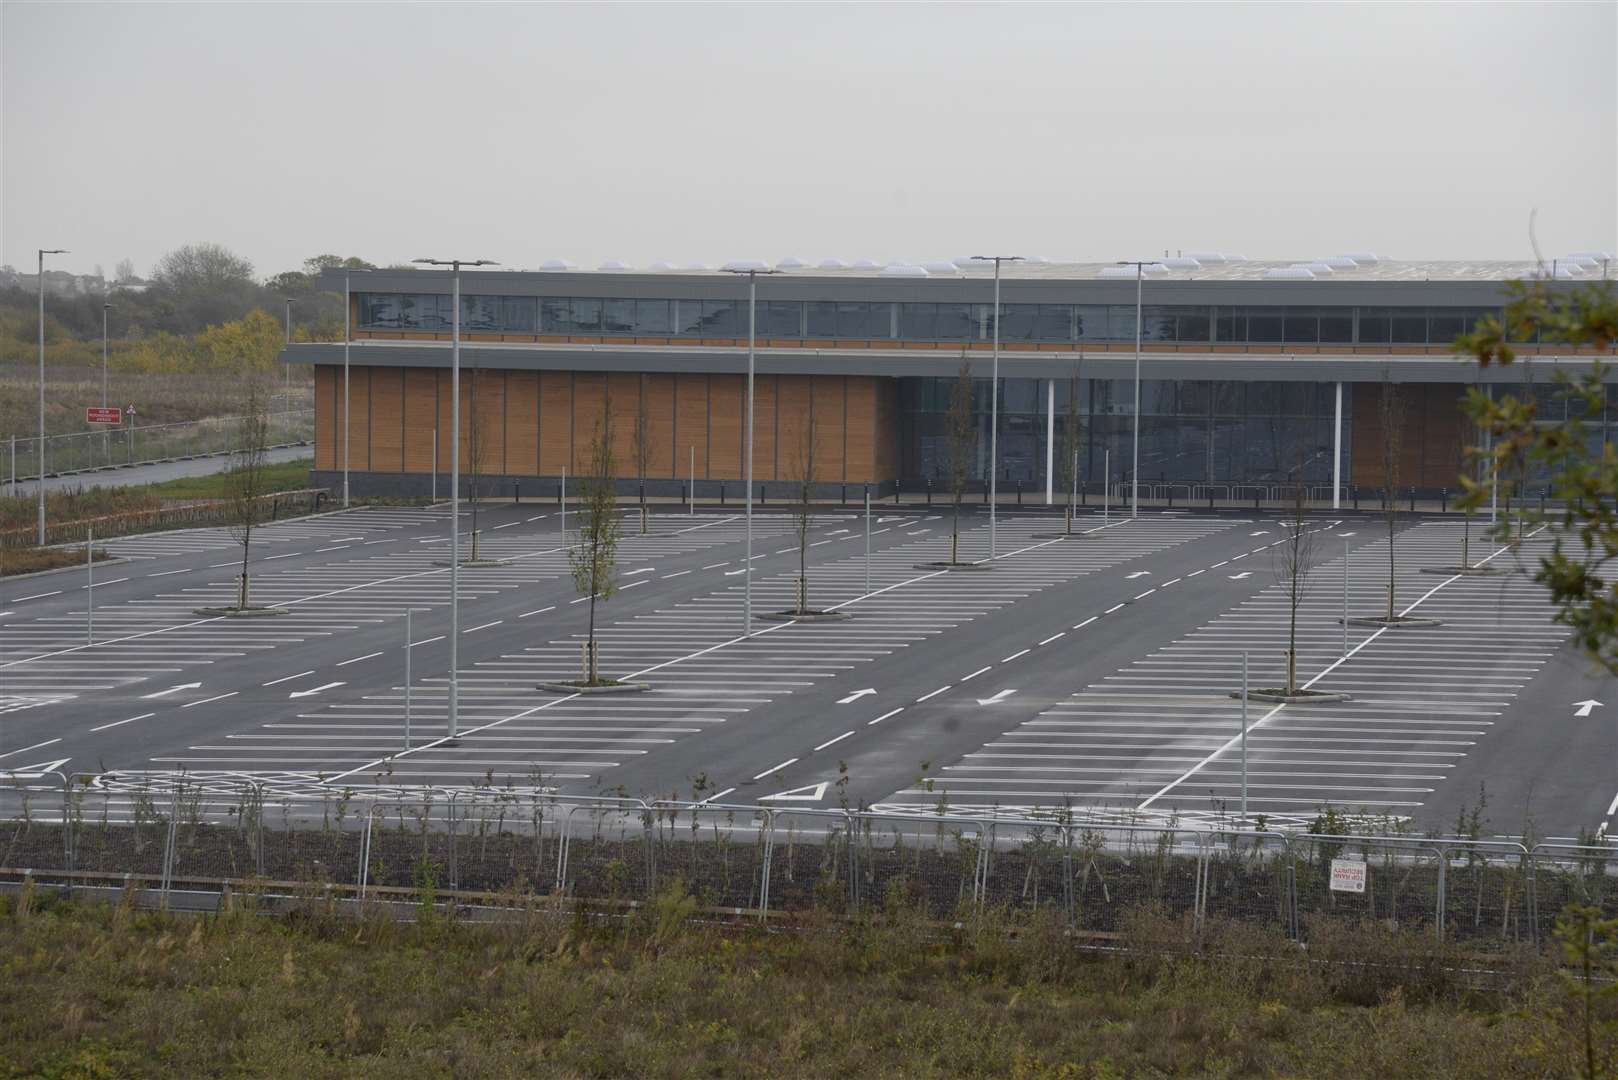 The Sainsbury's site at Altira Business Park in Herne Bay